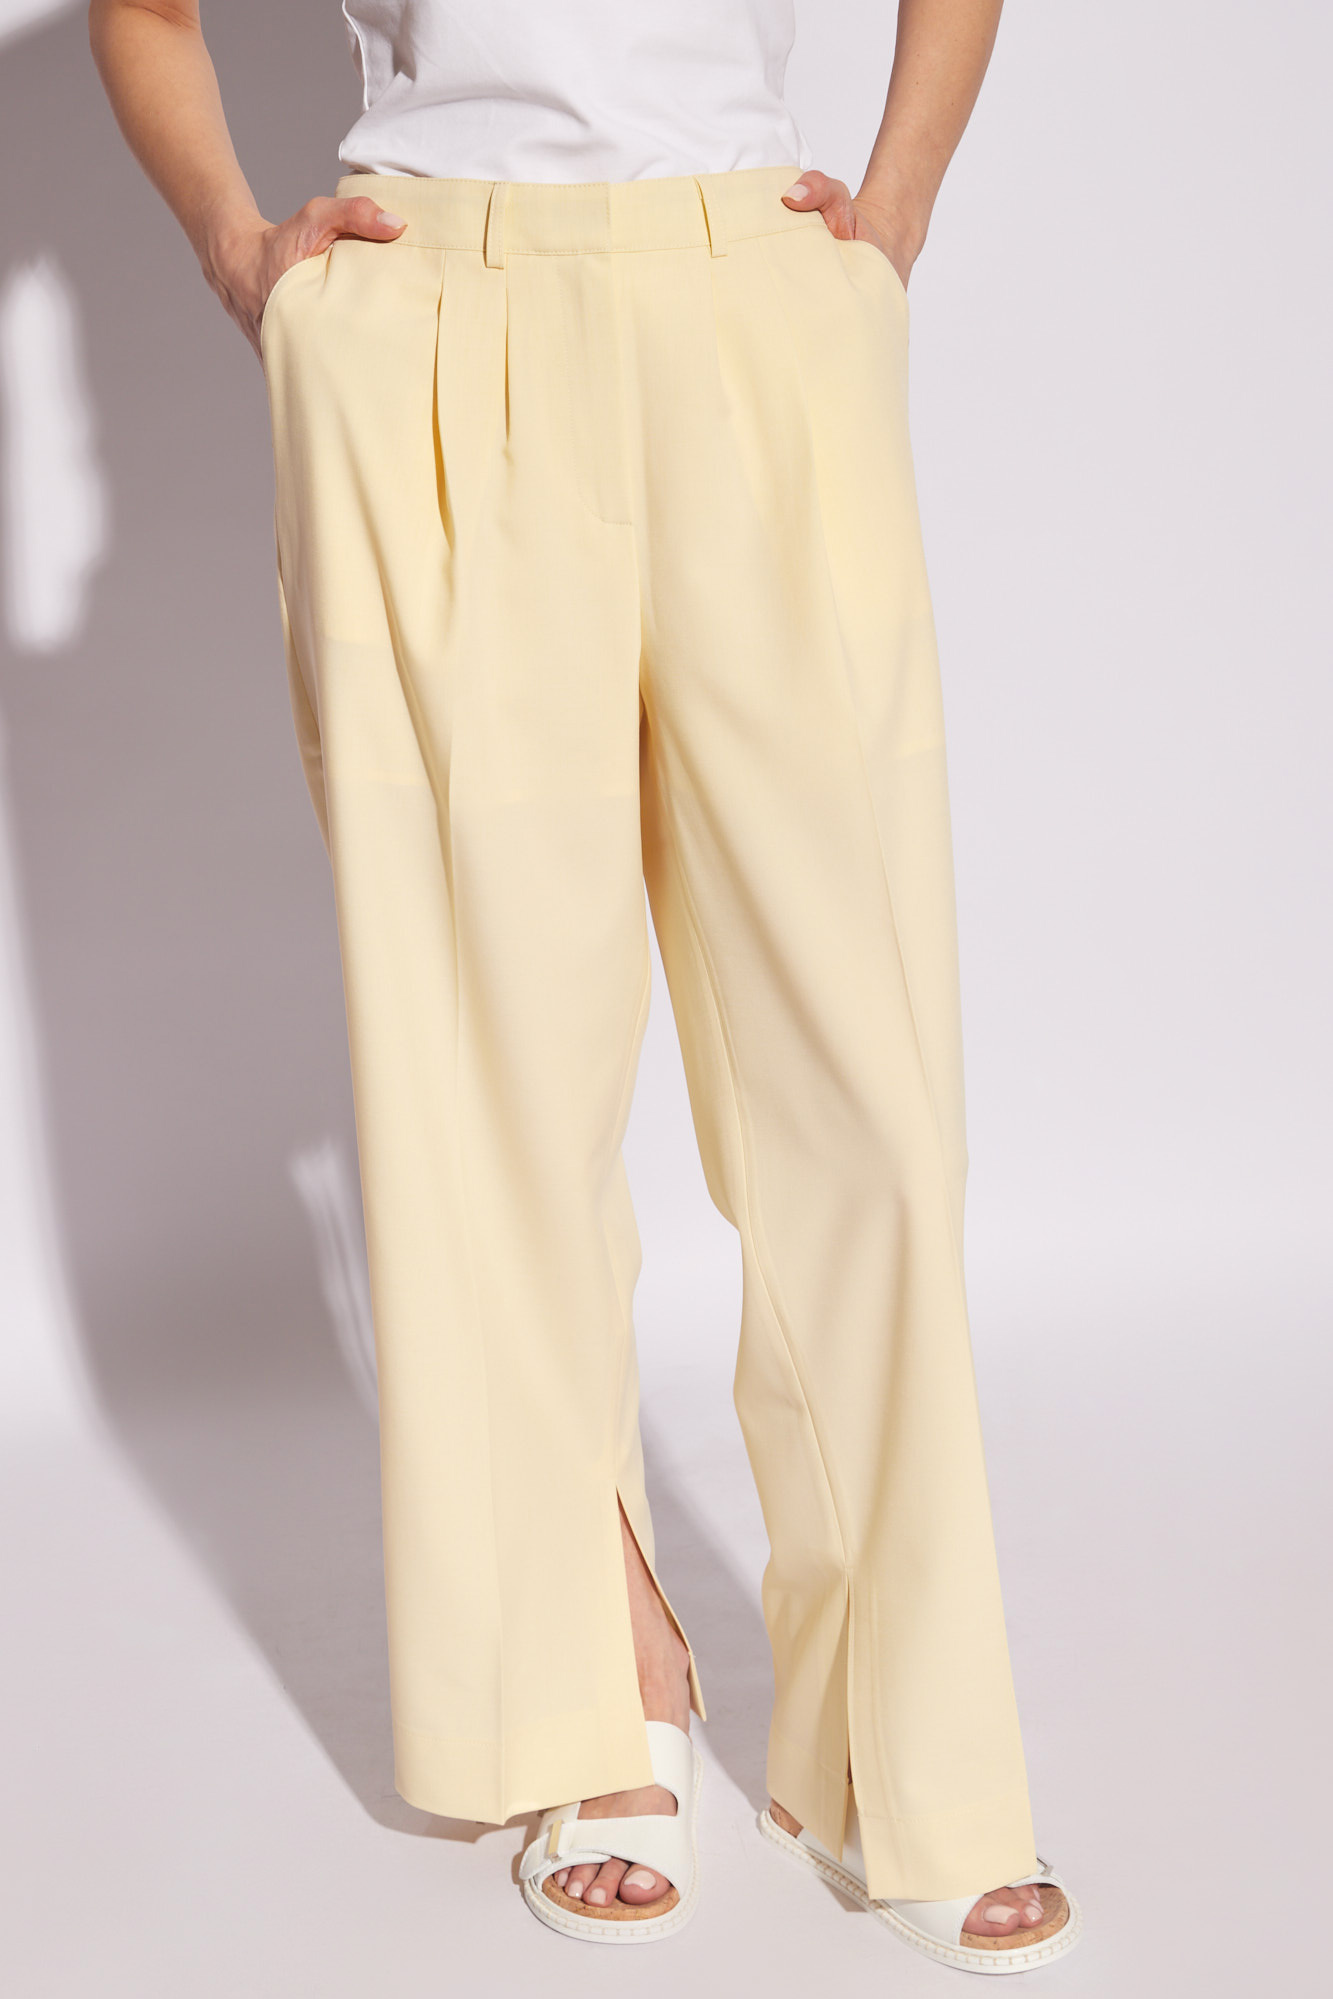 HERSKIND 'Rupert' pleat-front trousers